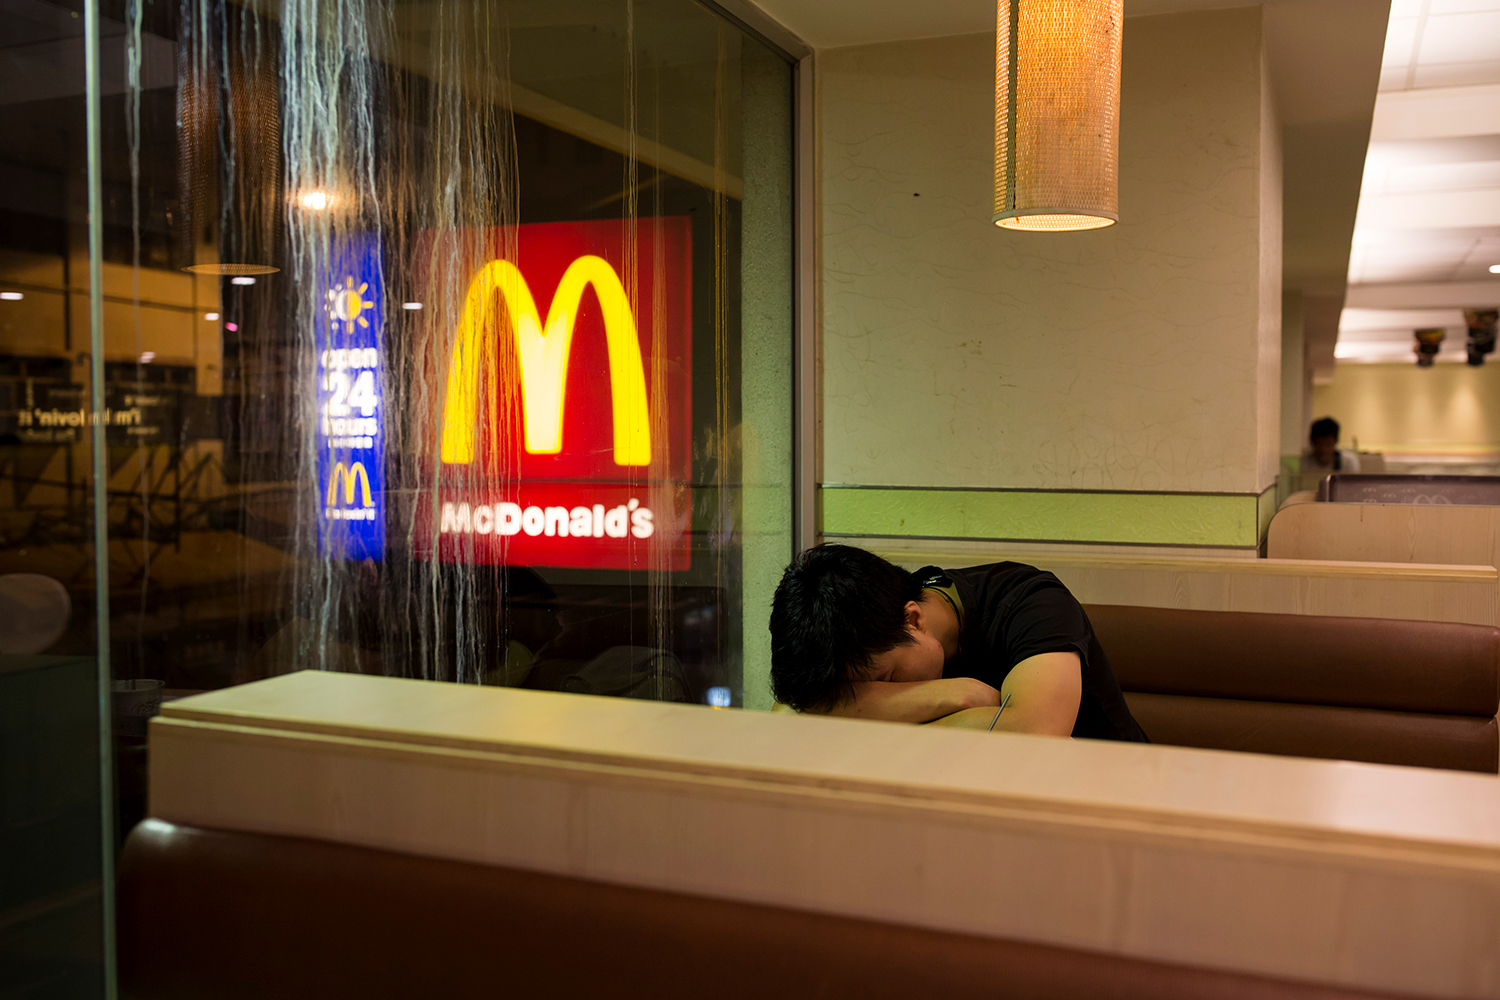 Fast food restaurants in China an option for homeless to spend the night